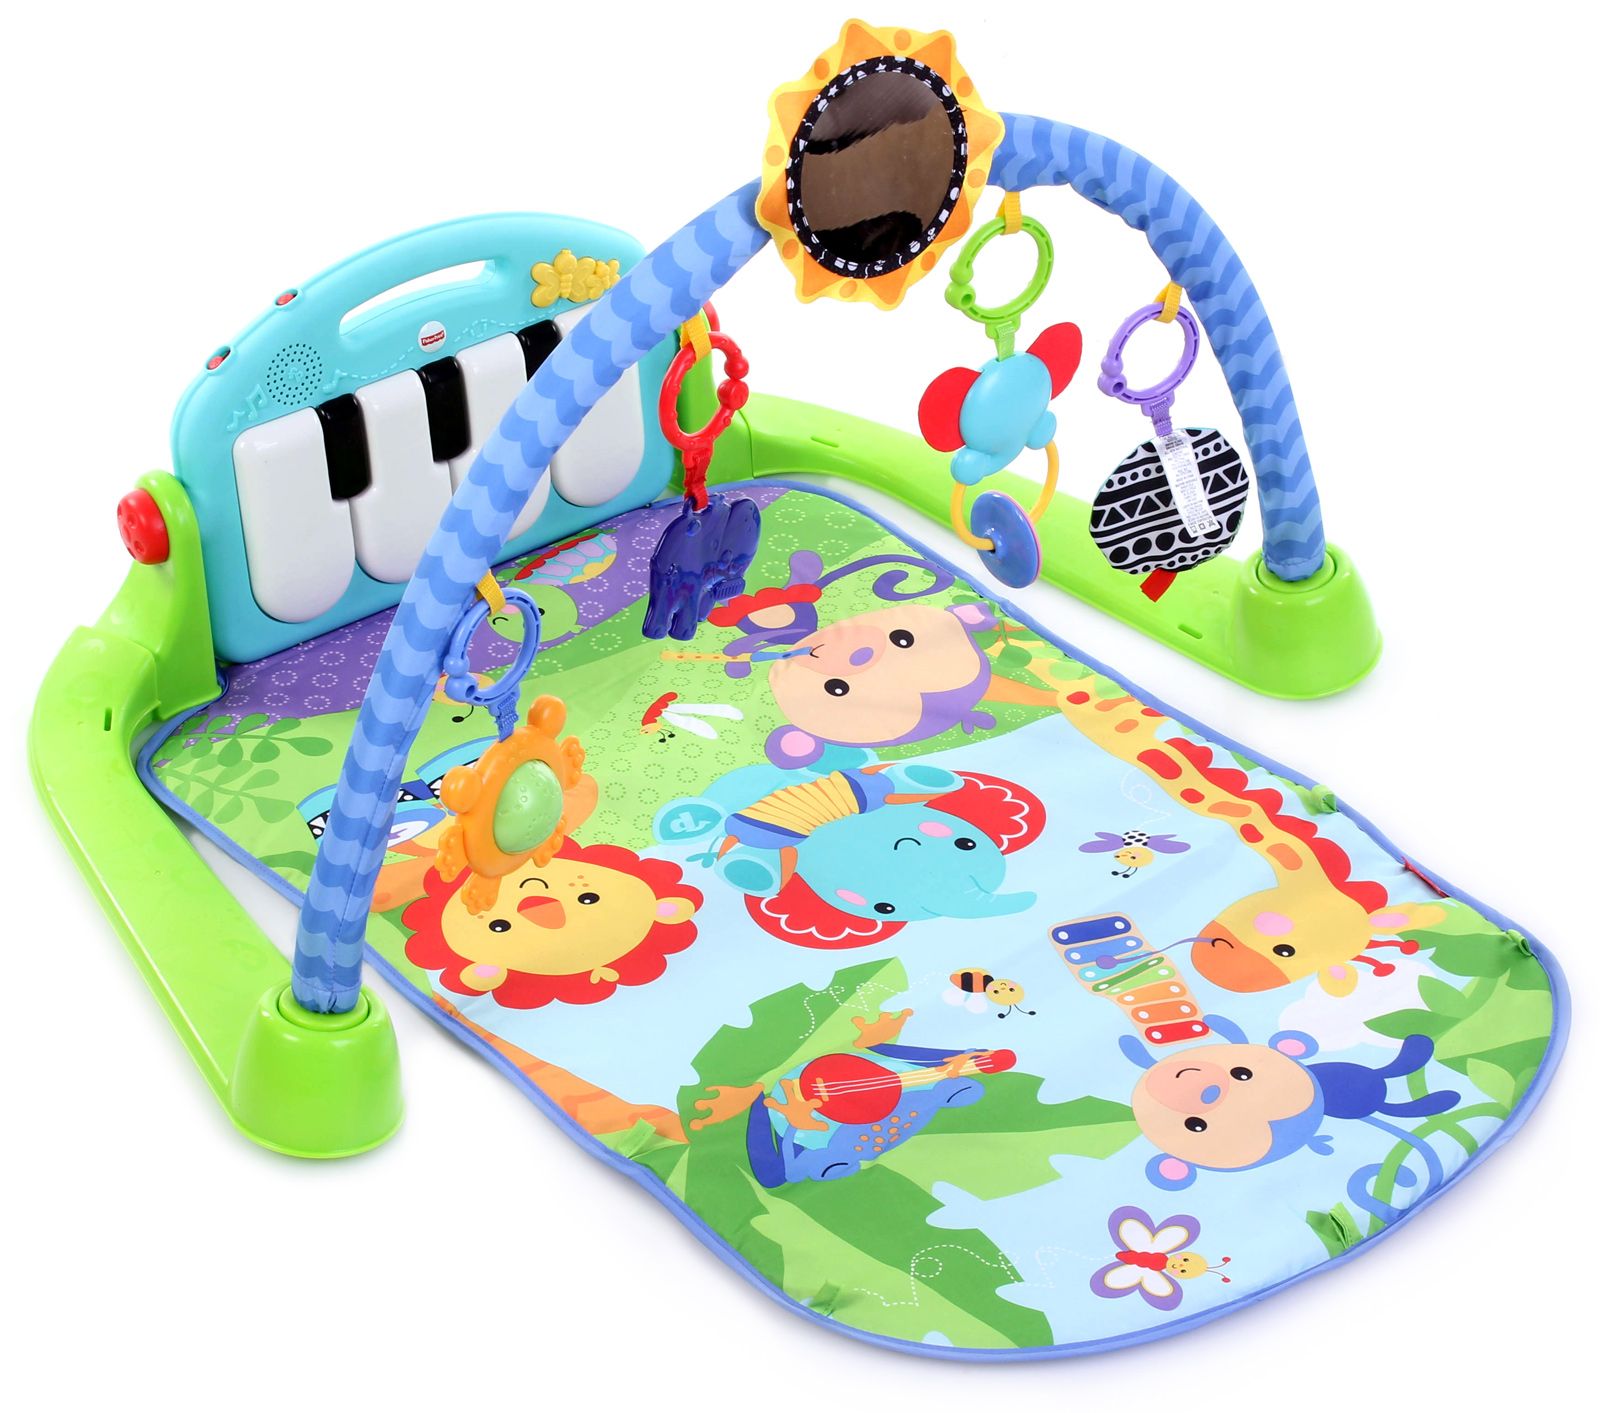 Fisher-Price First Steps Kick n Play Piano Gym 